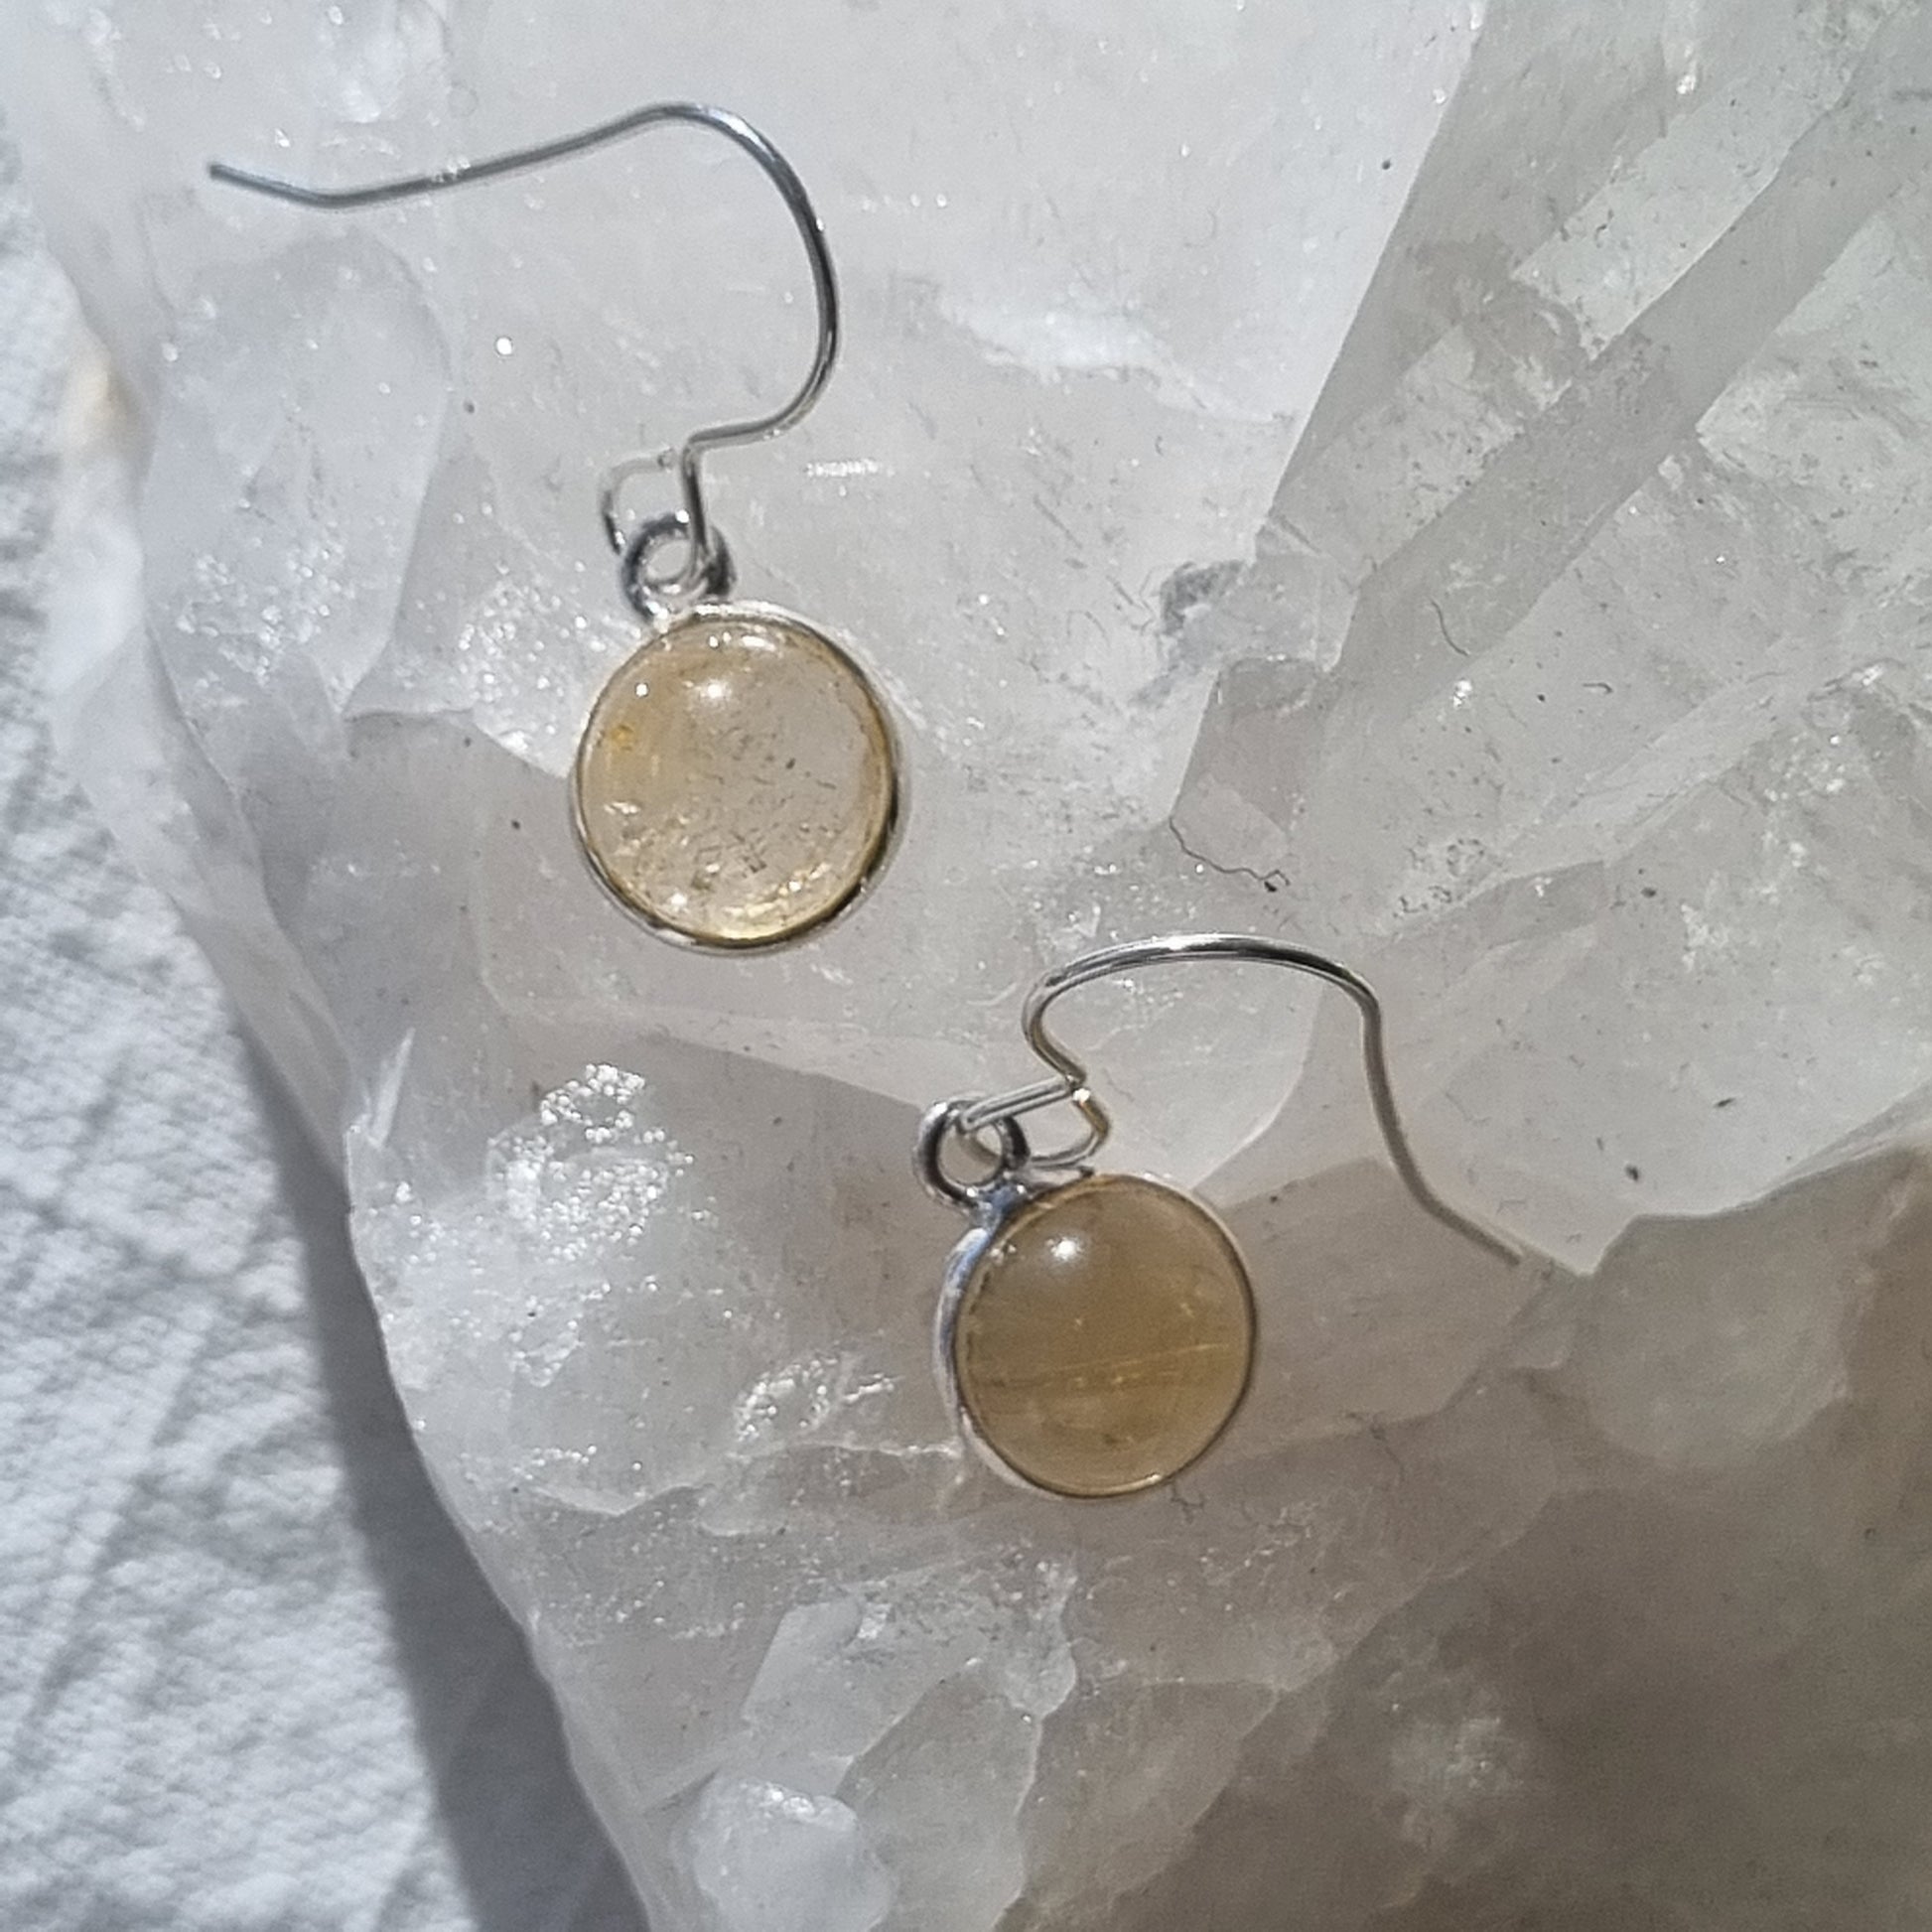 Citrine sterling silver earrings - Sparrow and Fox